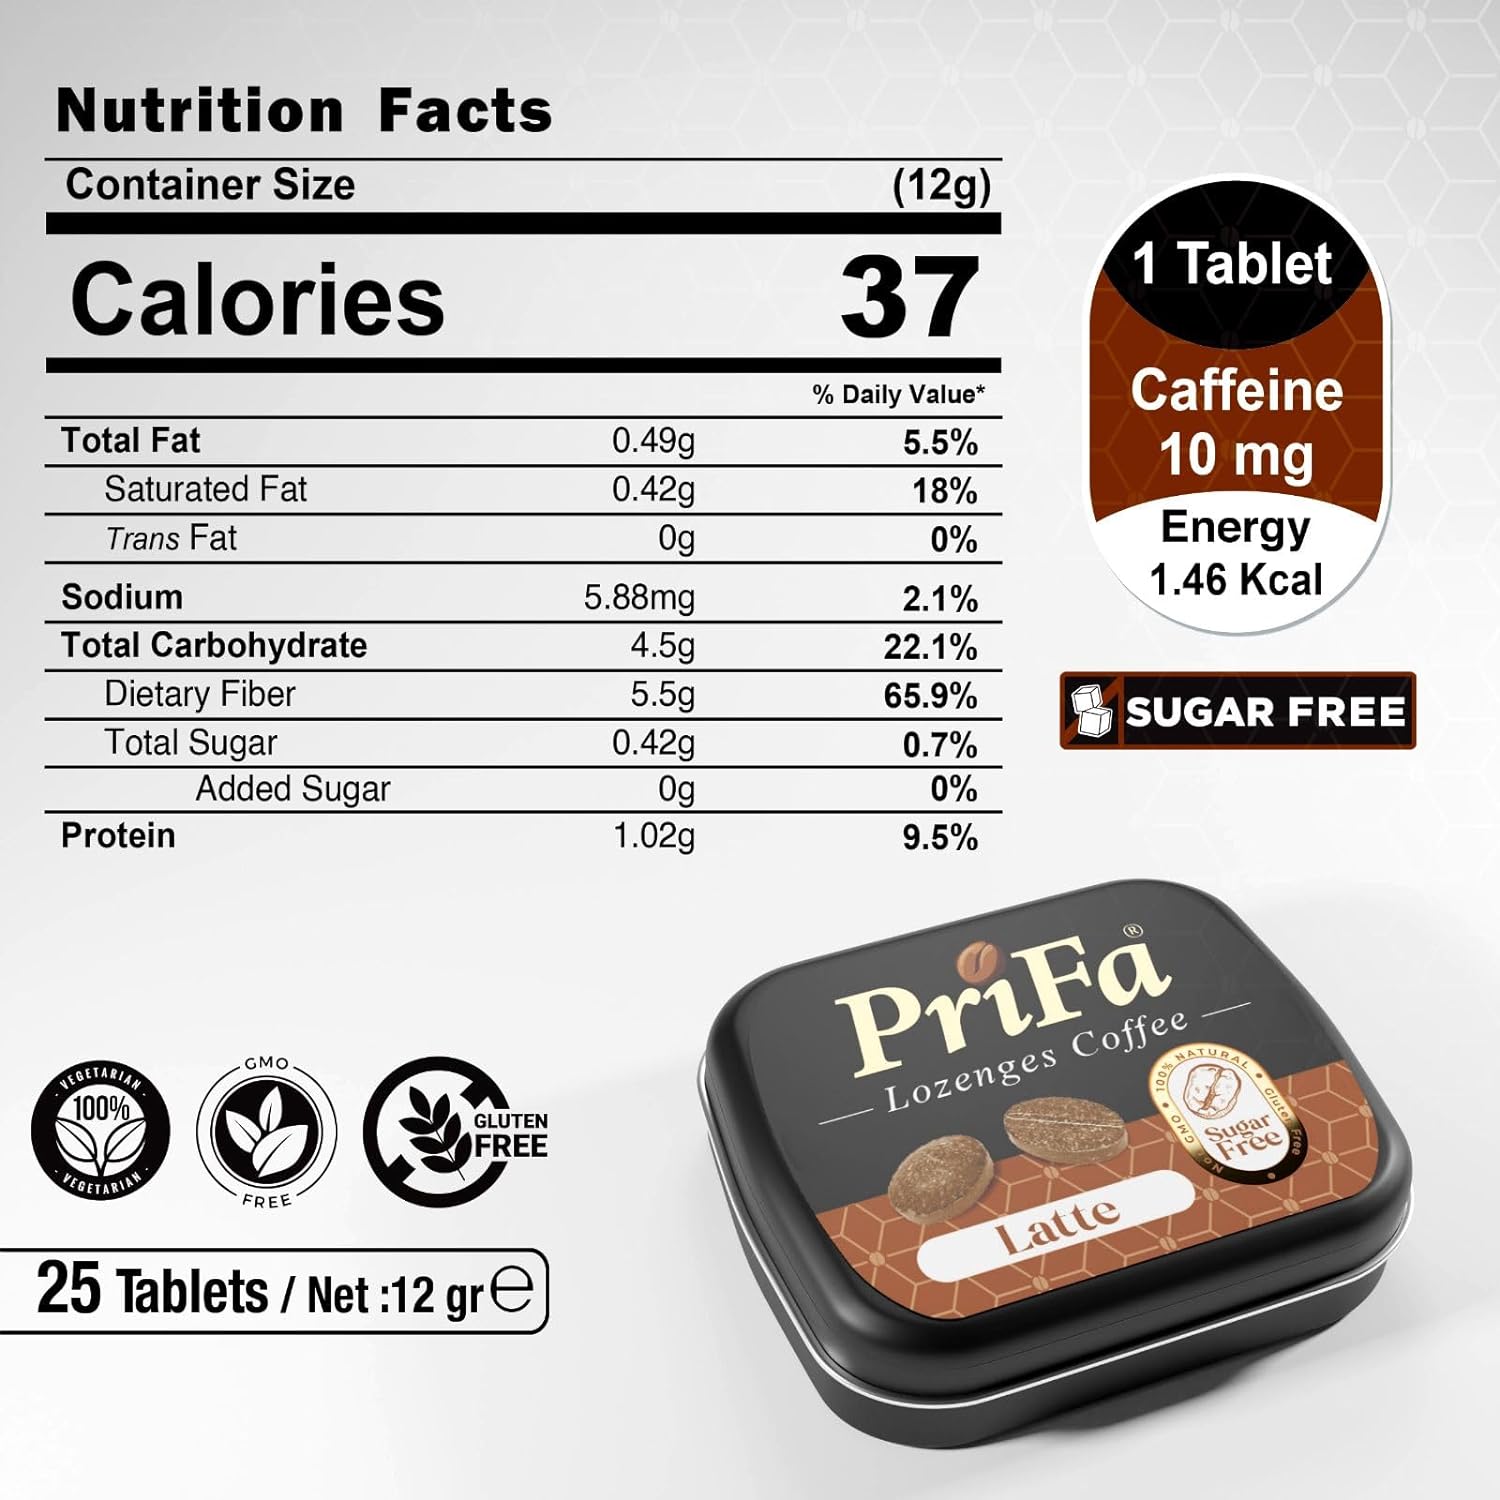 Nutrition facts label and a container of PriFa coffee lozenges, highlighting calories, caffeine content, and sugar-free claim.